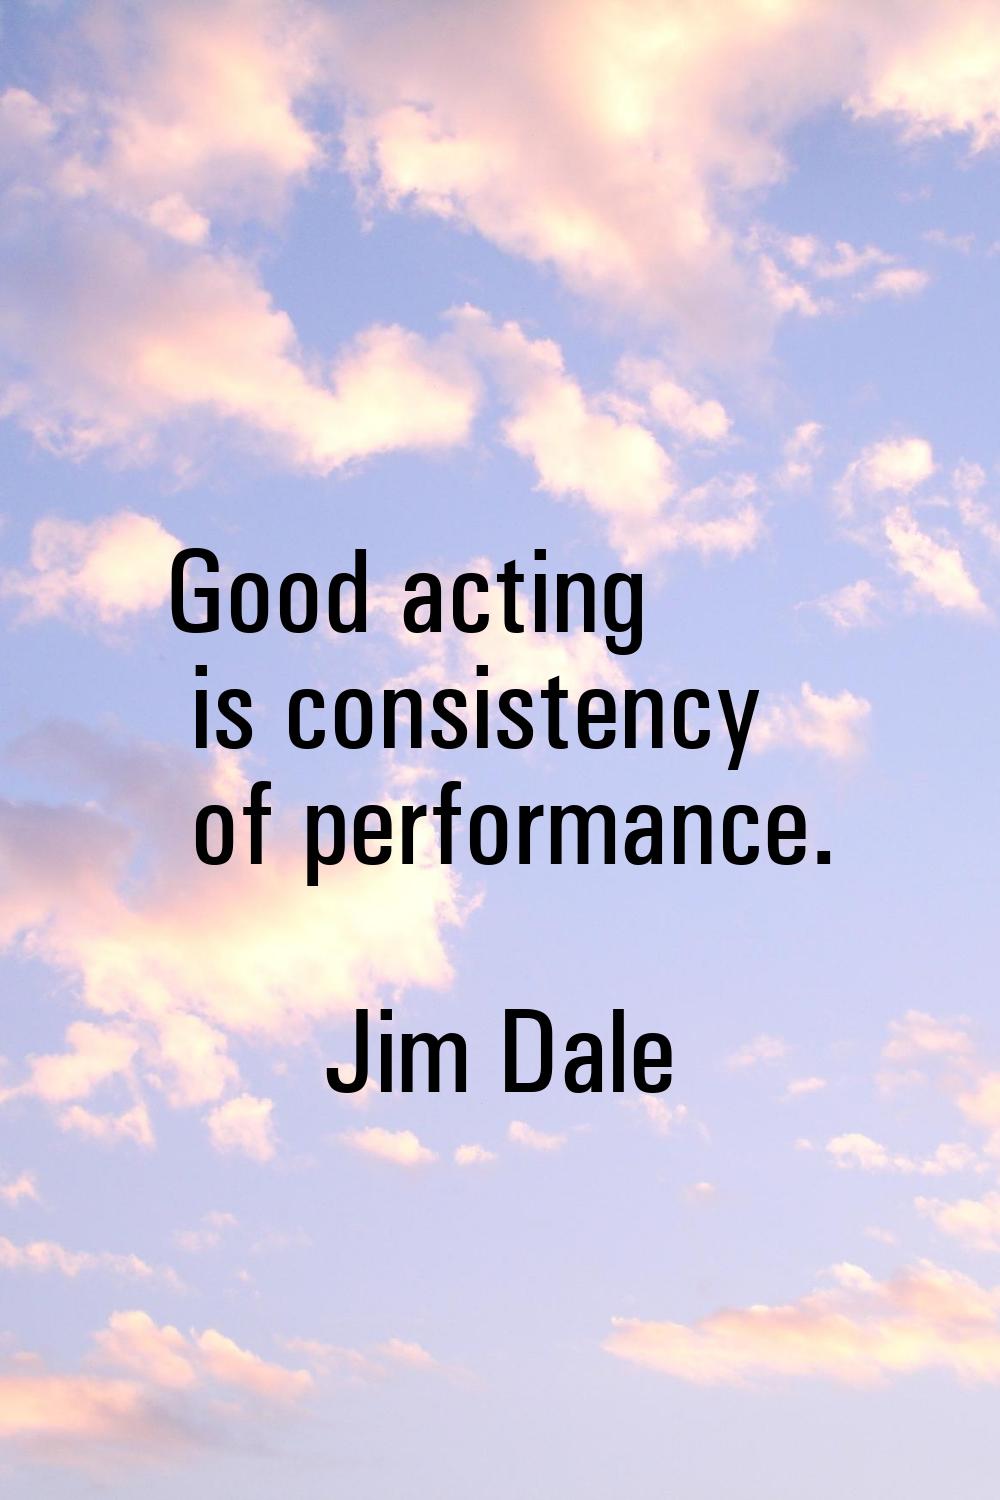 Good acting is consistency of performance.